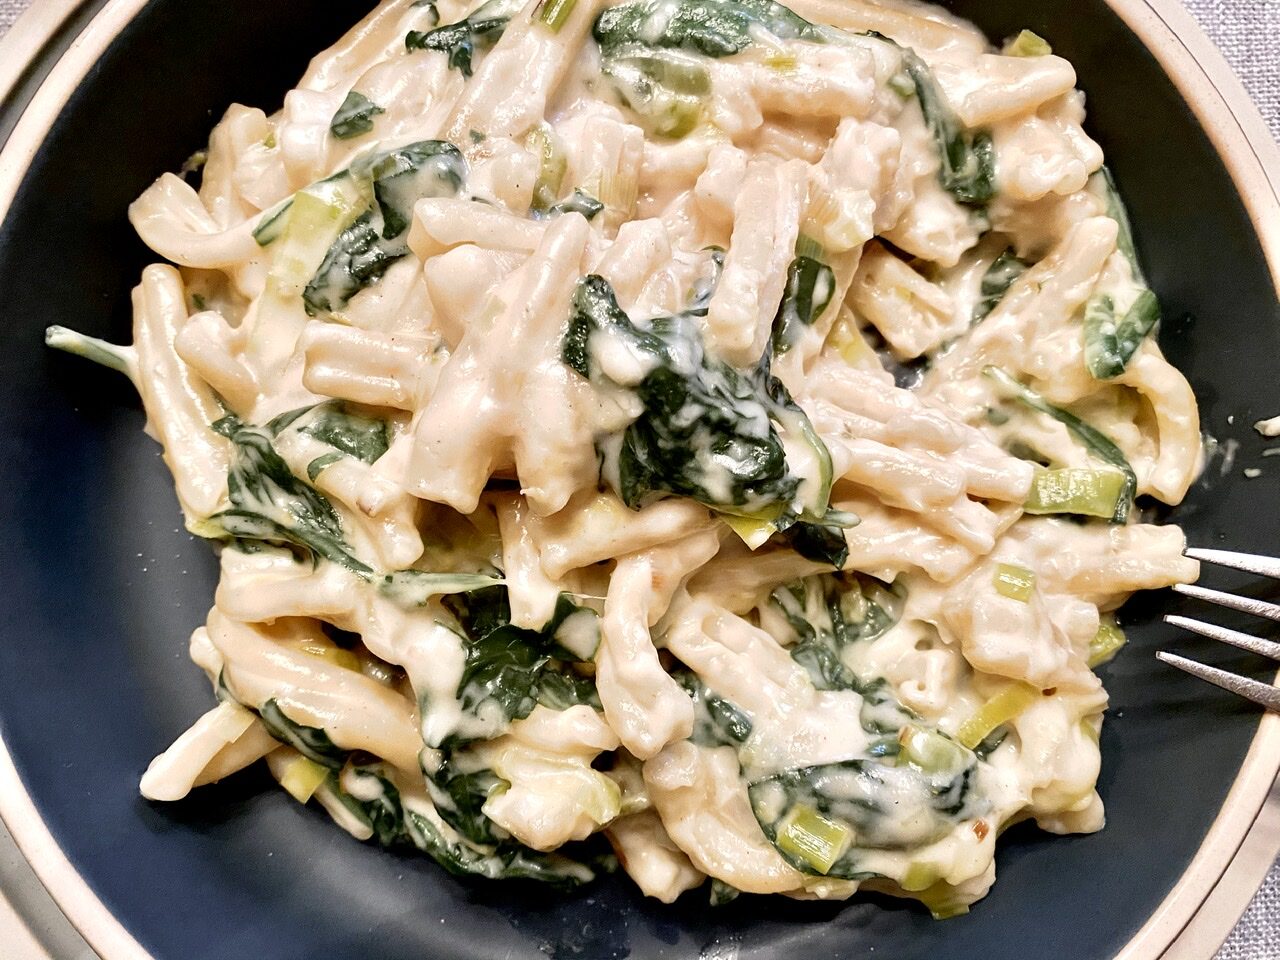 F4A59078 C0B4 4E74 976D 37CD0CCBAB94 e1599503454944 - Meatless Monday Lemony White Cheddar Pasta with Leeks & Spinach